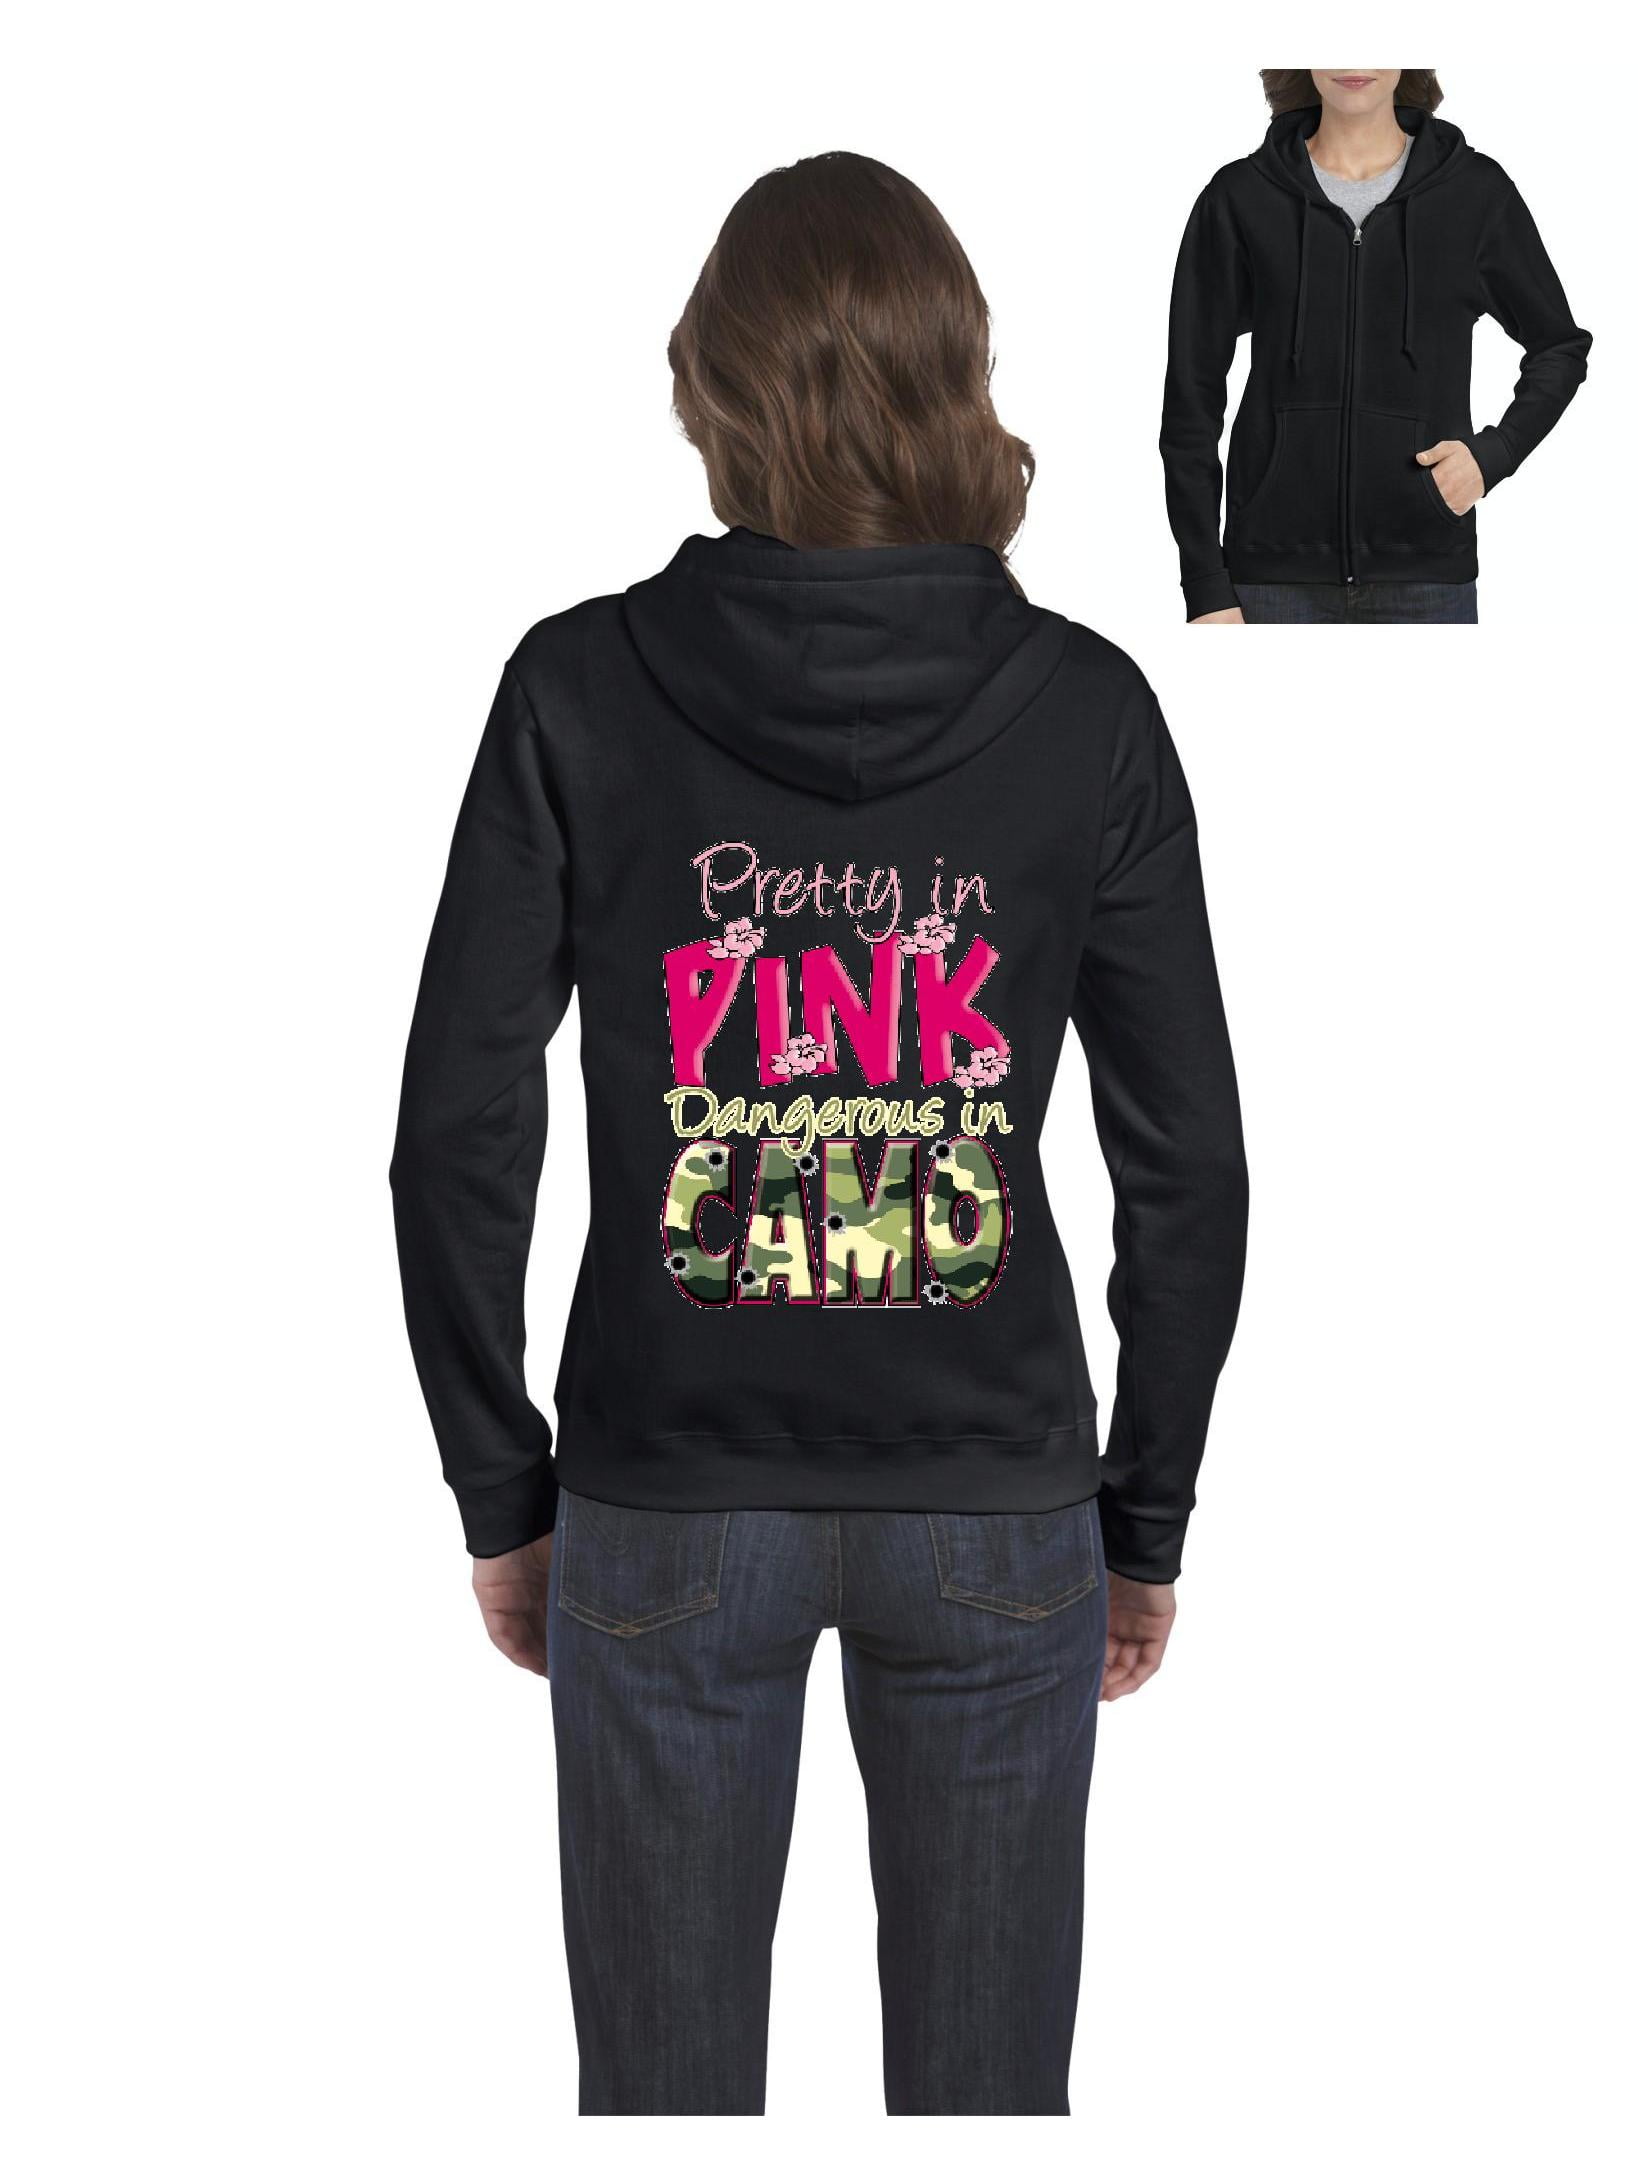 Pretty In Pink Dangerous In Camo Hoodie Hunting Asst Colors Sizes SM To 3XL 